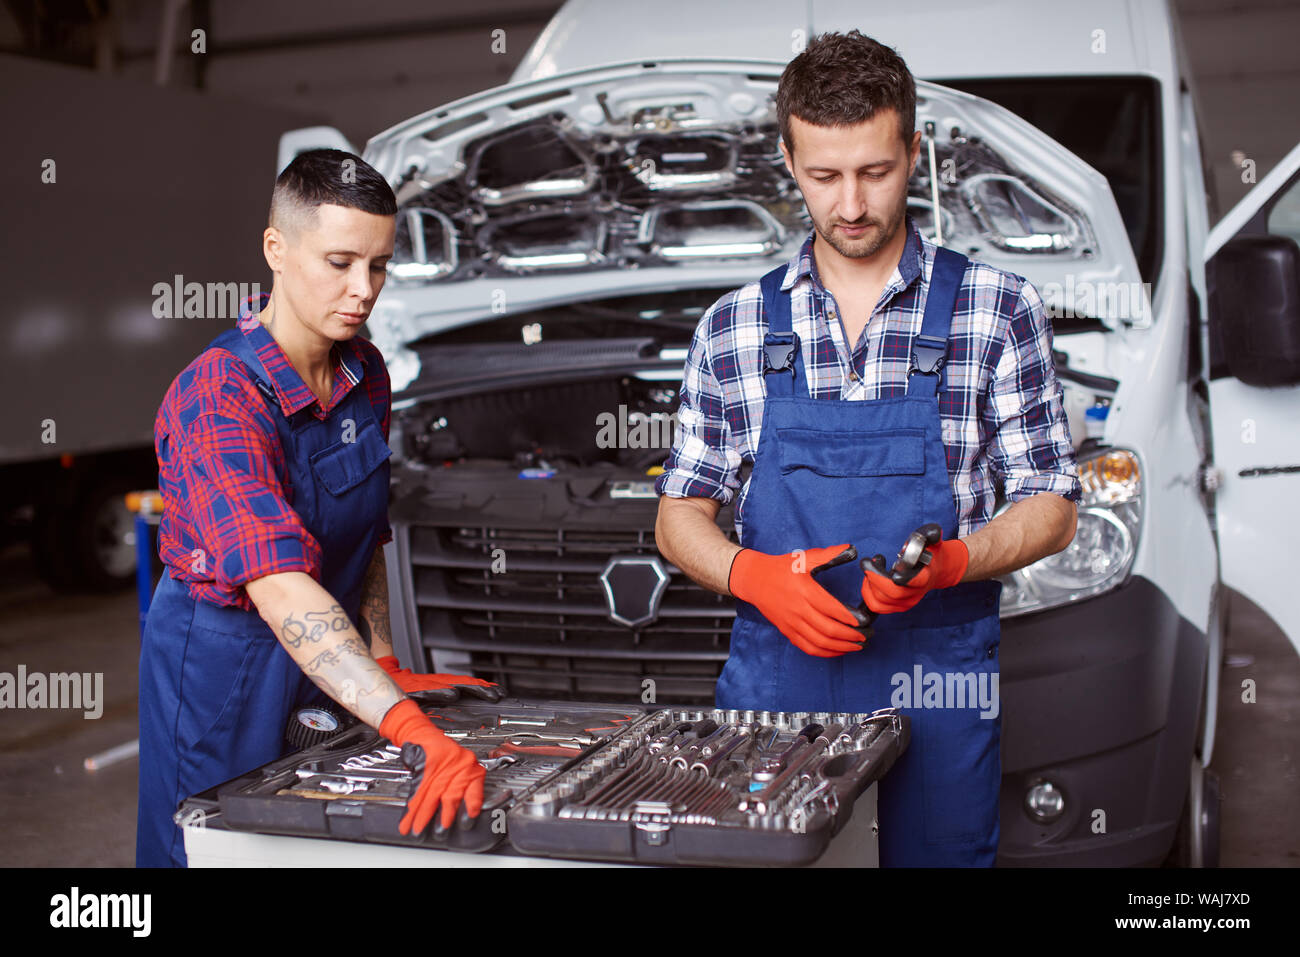 Two people working at the car repair workshop together as they fix the mechanical part of it with the help of numerous instruments. Stock Photo